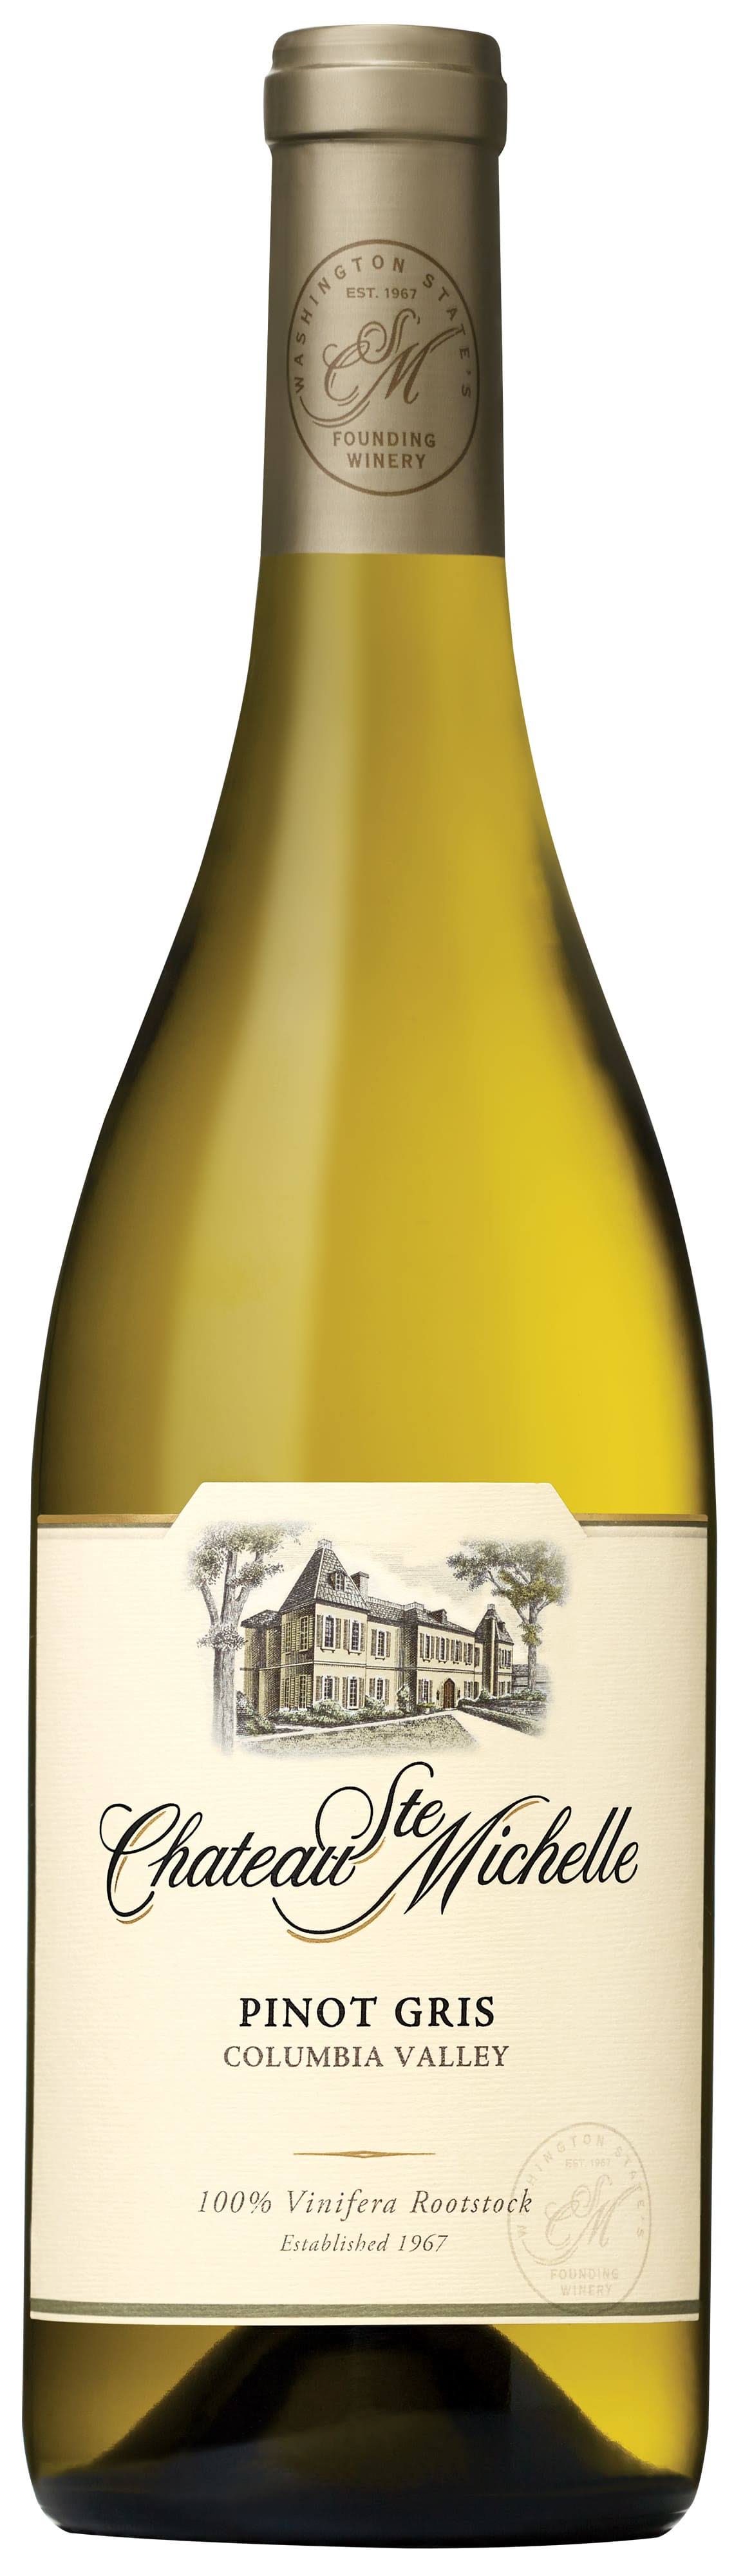 Chateau Ste. Michelle Pinot Gris - 750ml